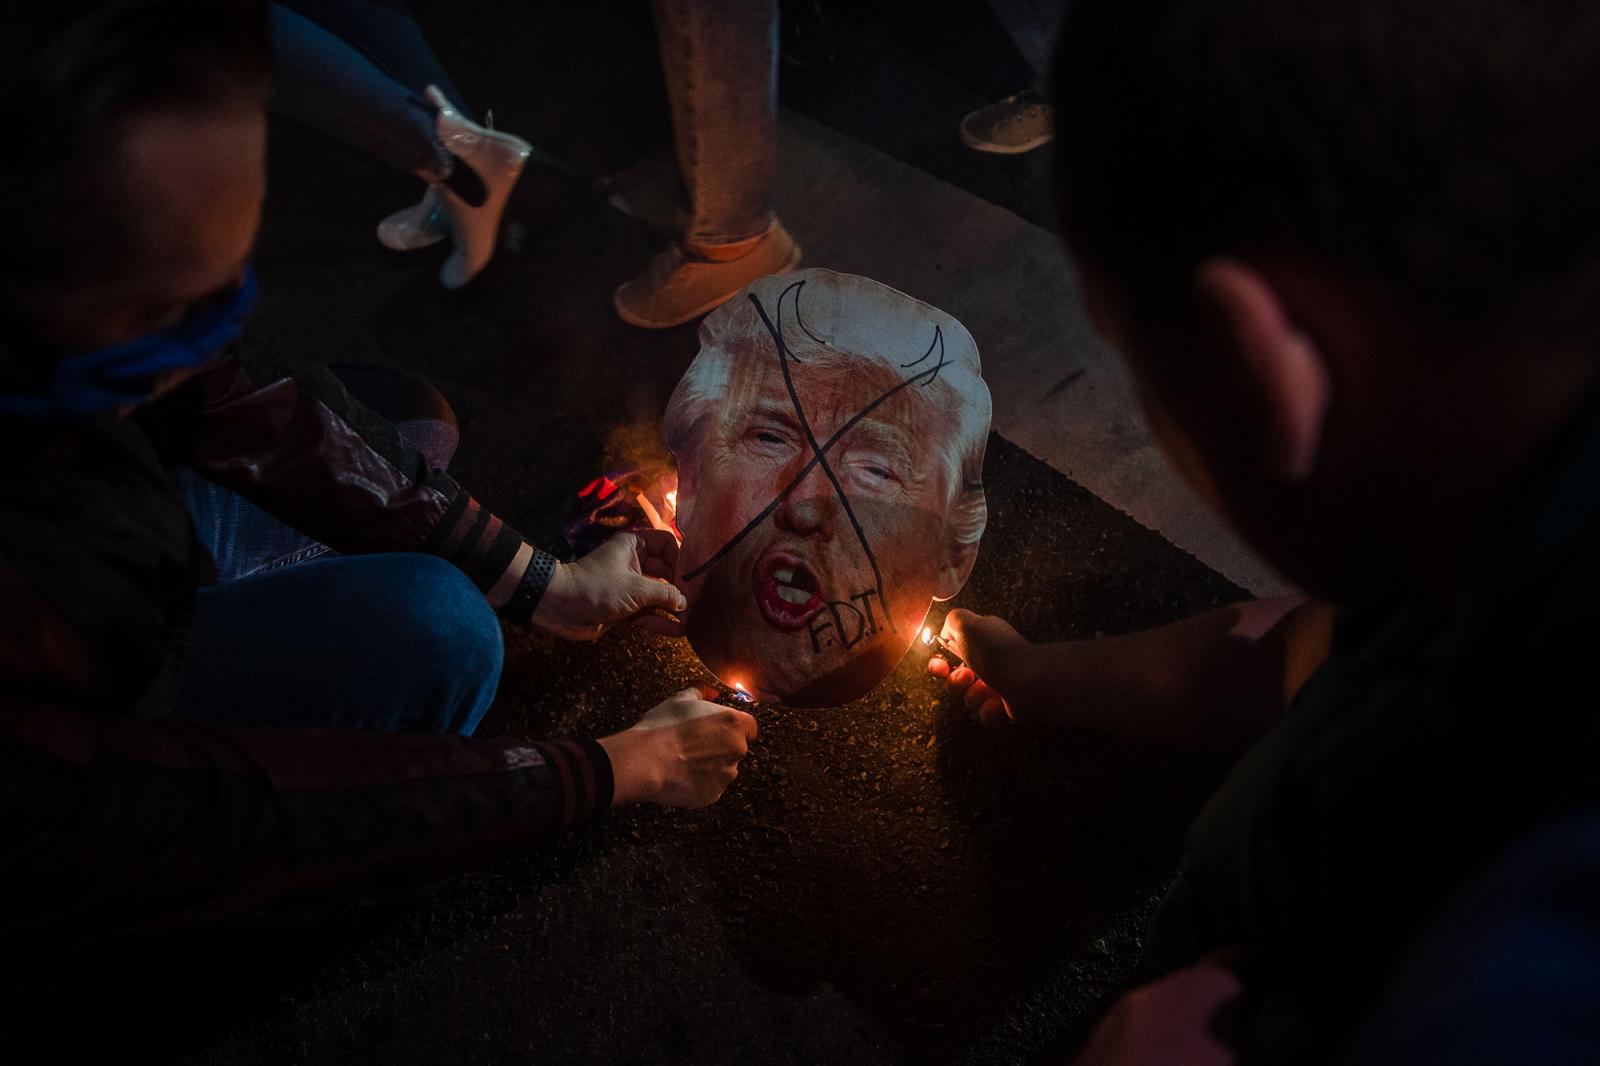 United States - Men set a cardboard cutout on fire of President Donald...